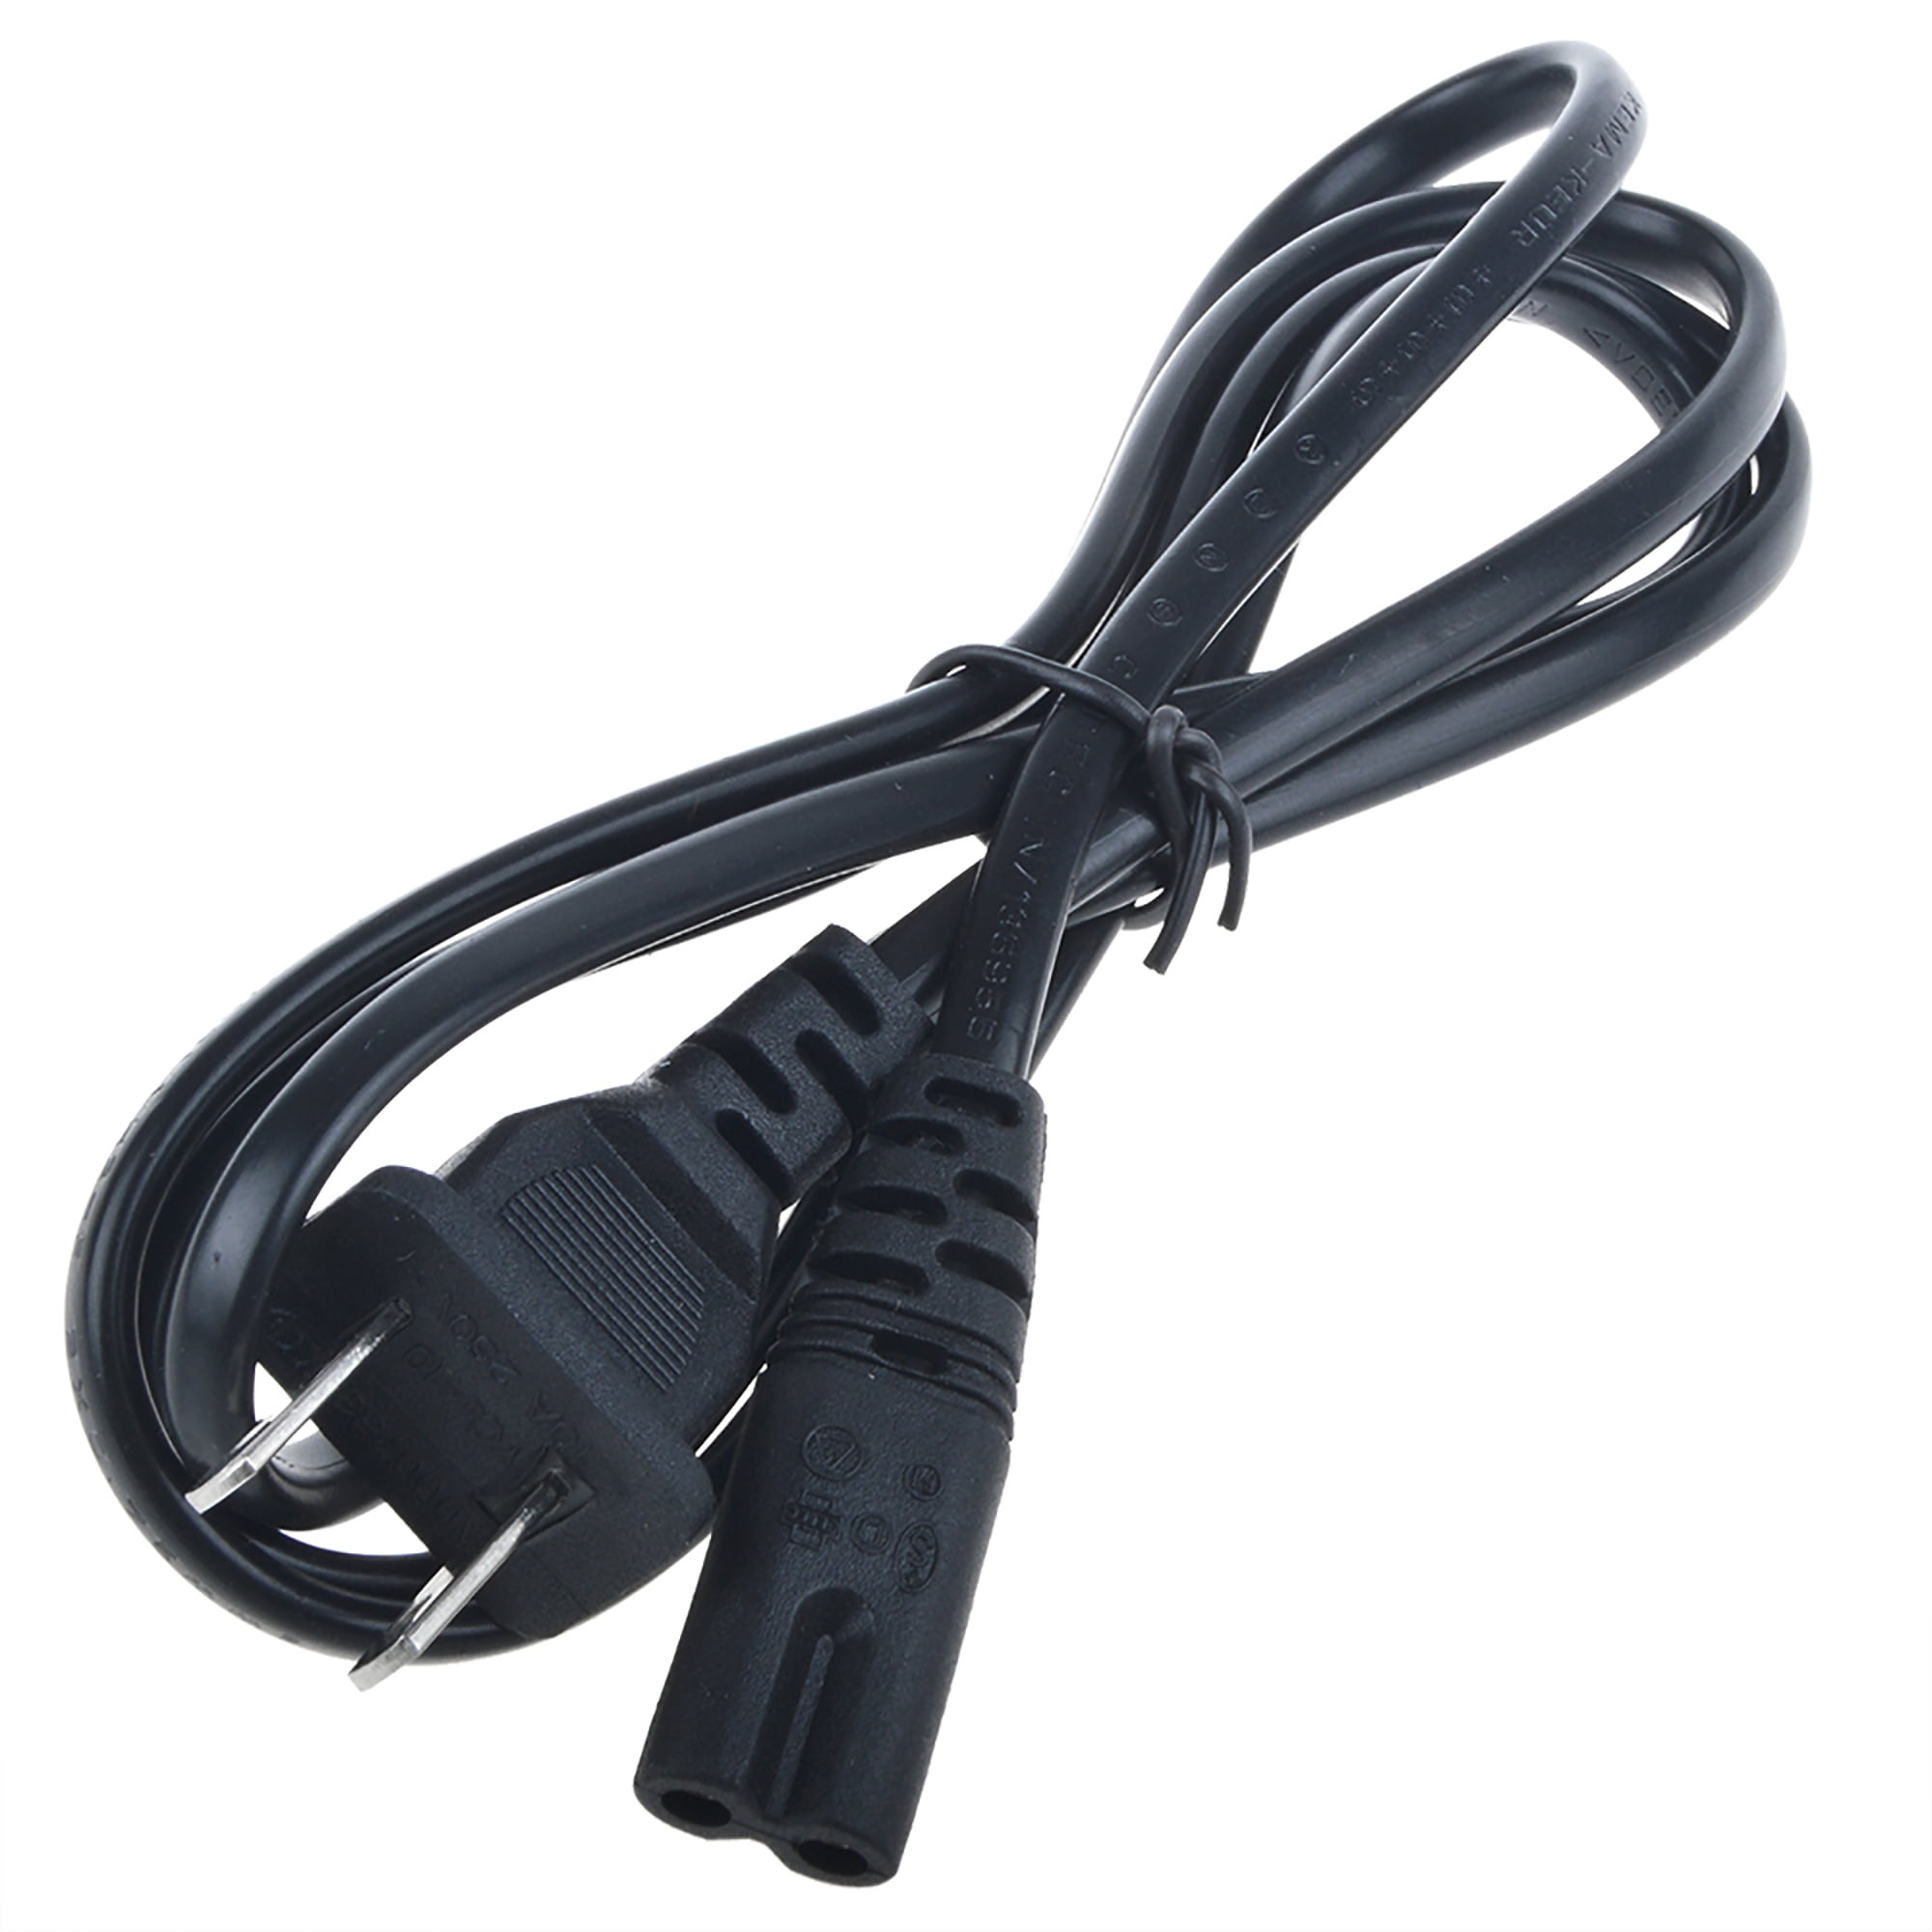  UL Listed 12ft AC Power Cord for HP Deskjet 3755 2547 2548 2549  3758 5650 2622 3752 2600 2652 2655 2130 2132 3630 1112 2132 Printer  Replacement 2 Prong Power Cord Cable : Electronics